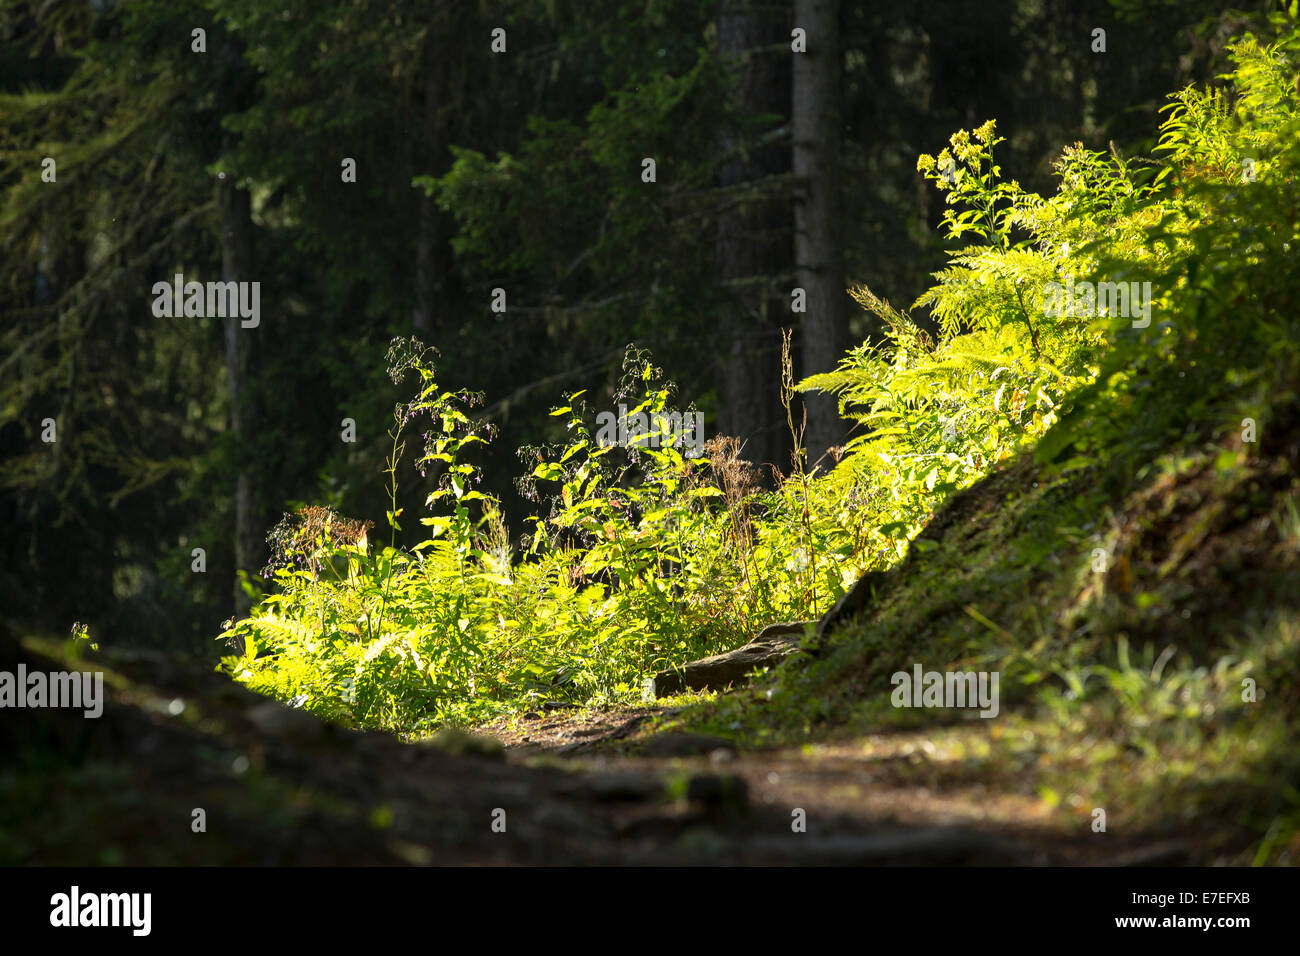 Native forest in the Swiss Alps near Trient, with sunlit understorey. Stock Photo